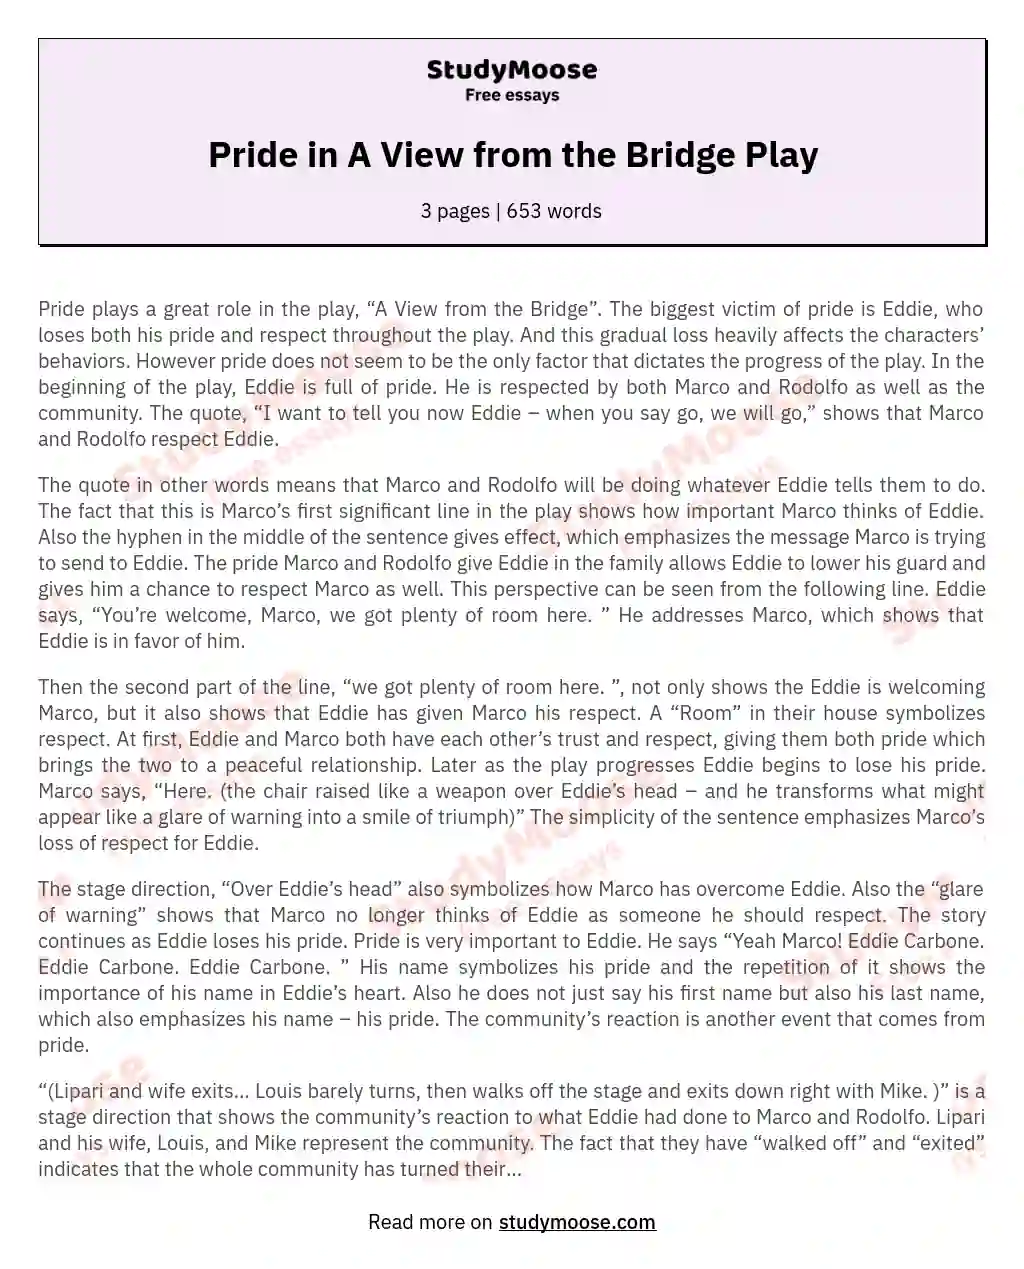 Pride in A View from the Bridge Play essay